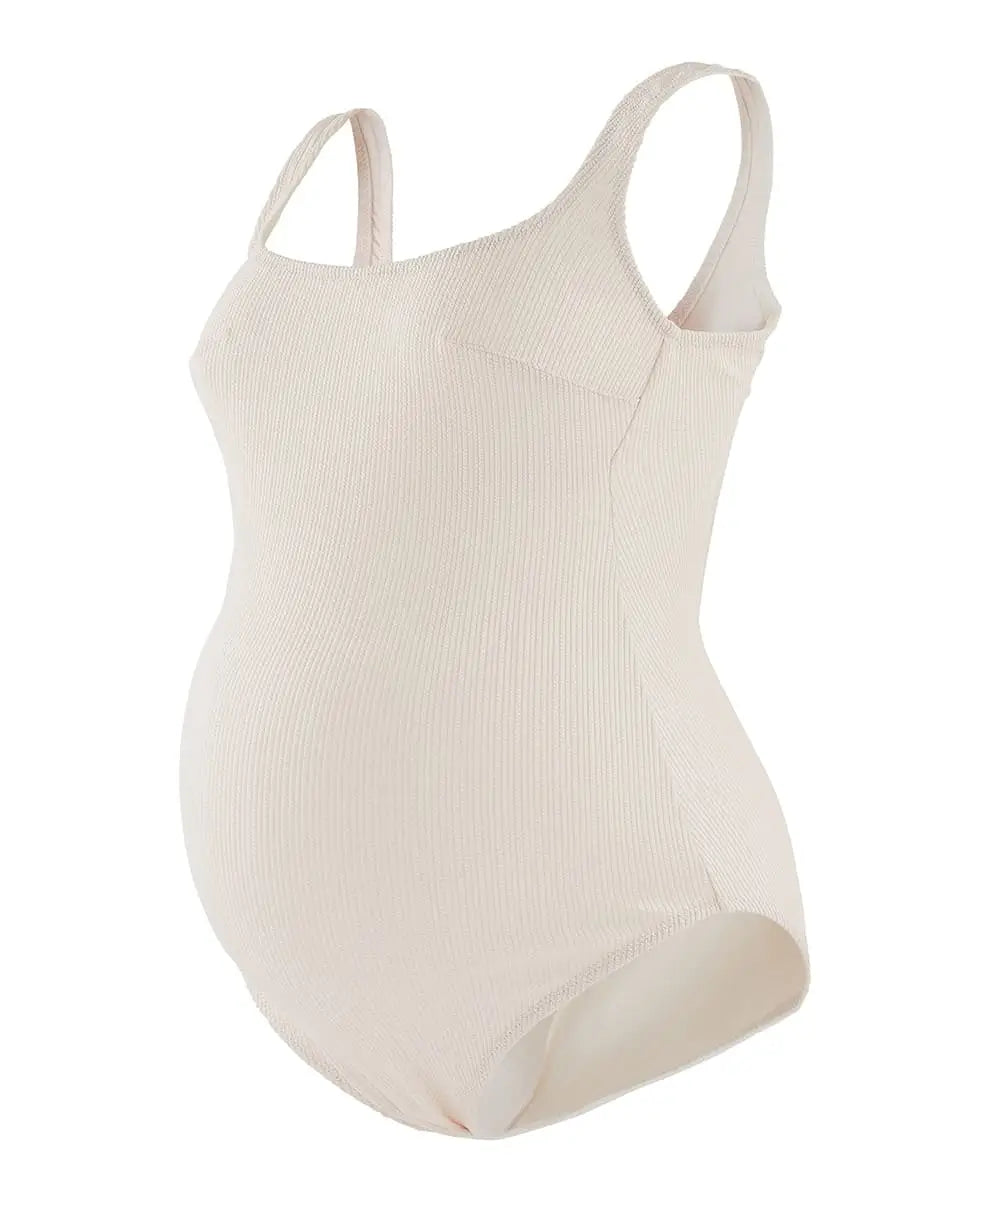 Maternity swimsuit Bayside pearl